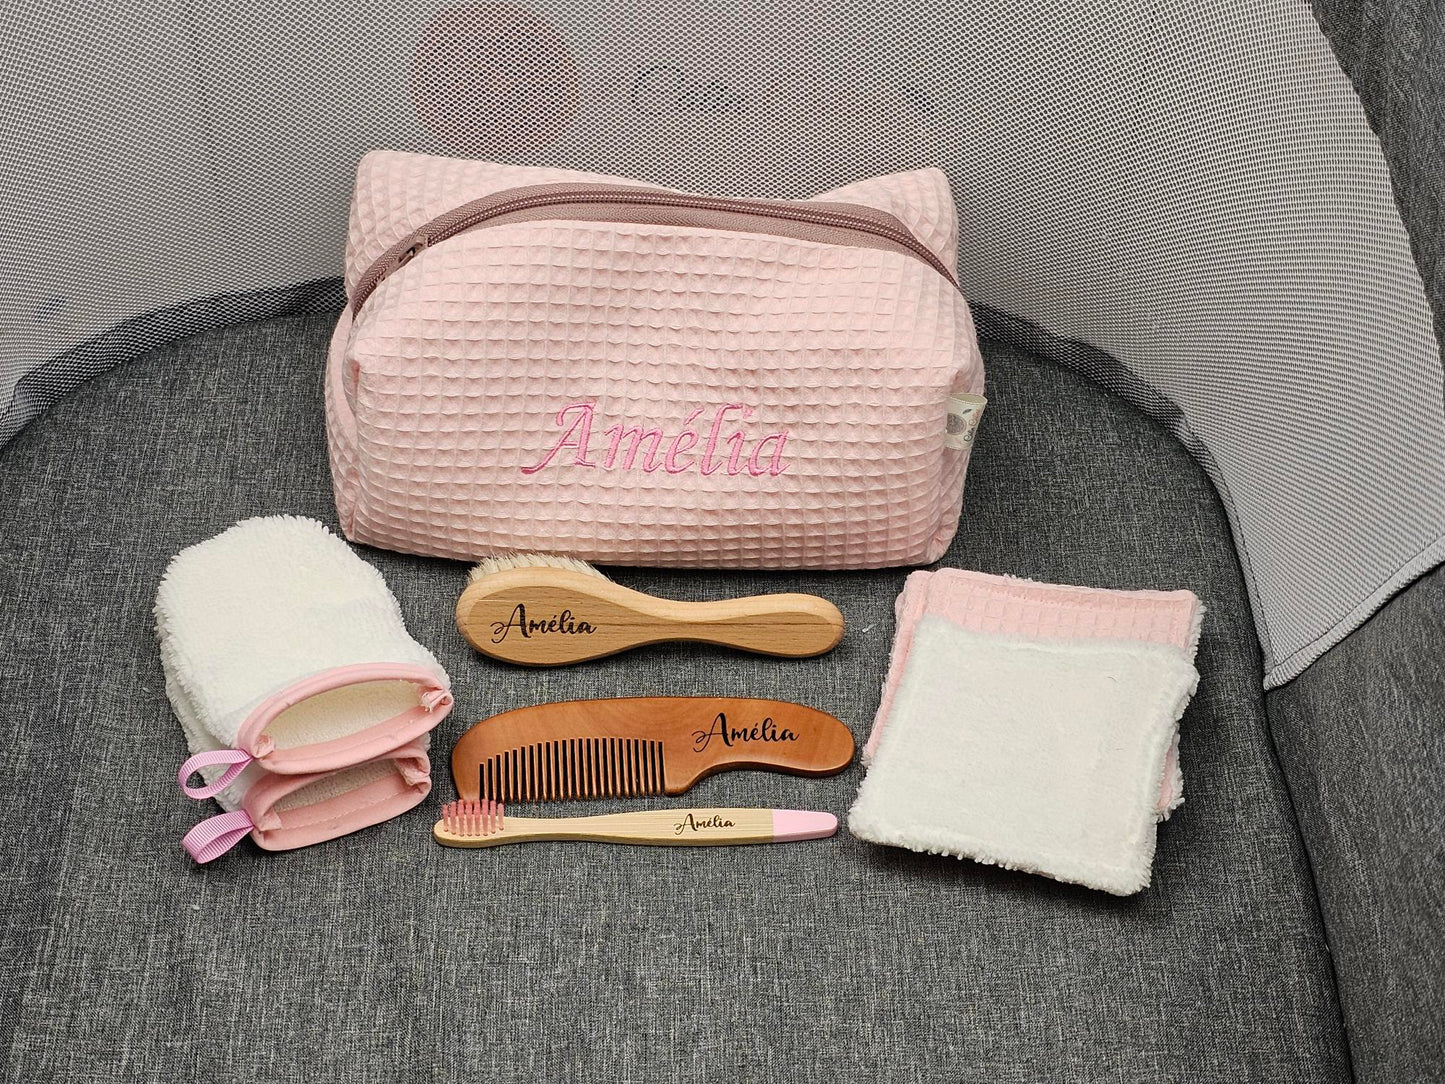 Personalized children's toiletry bag with engraved accessories